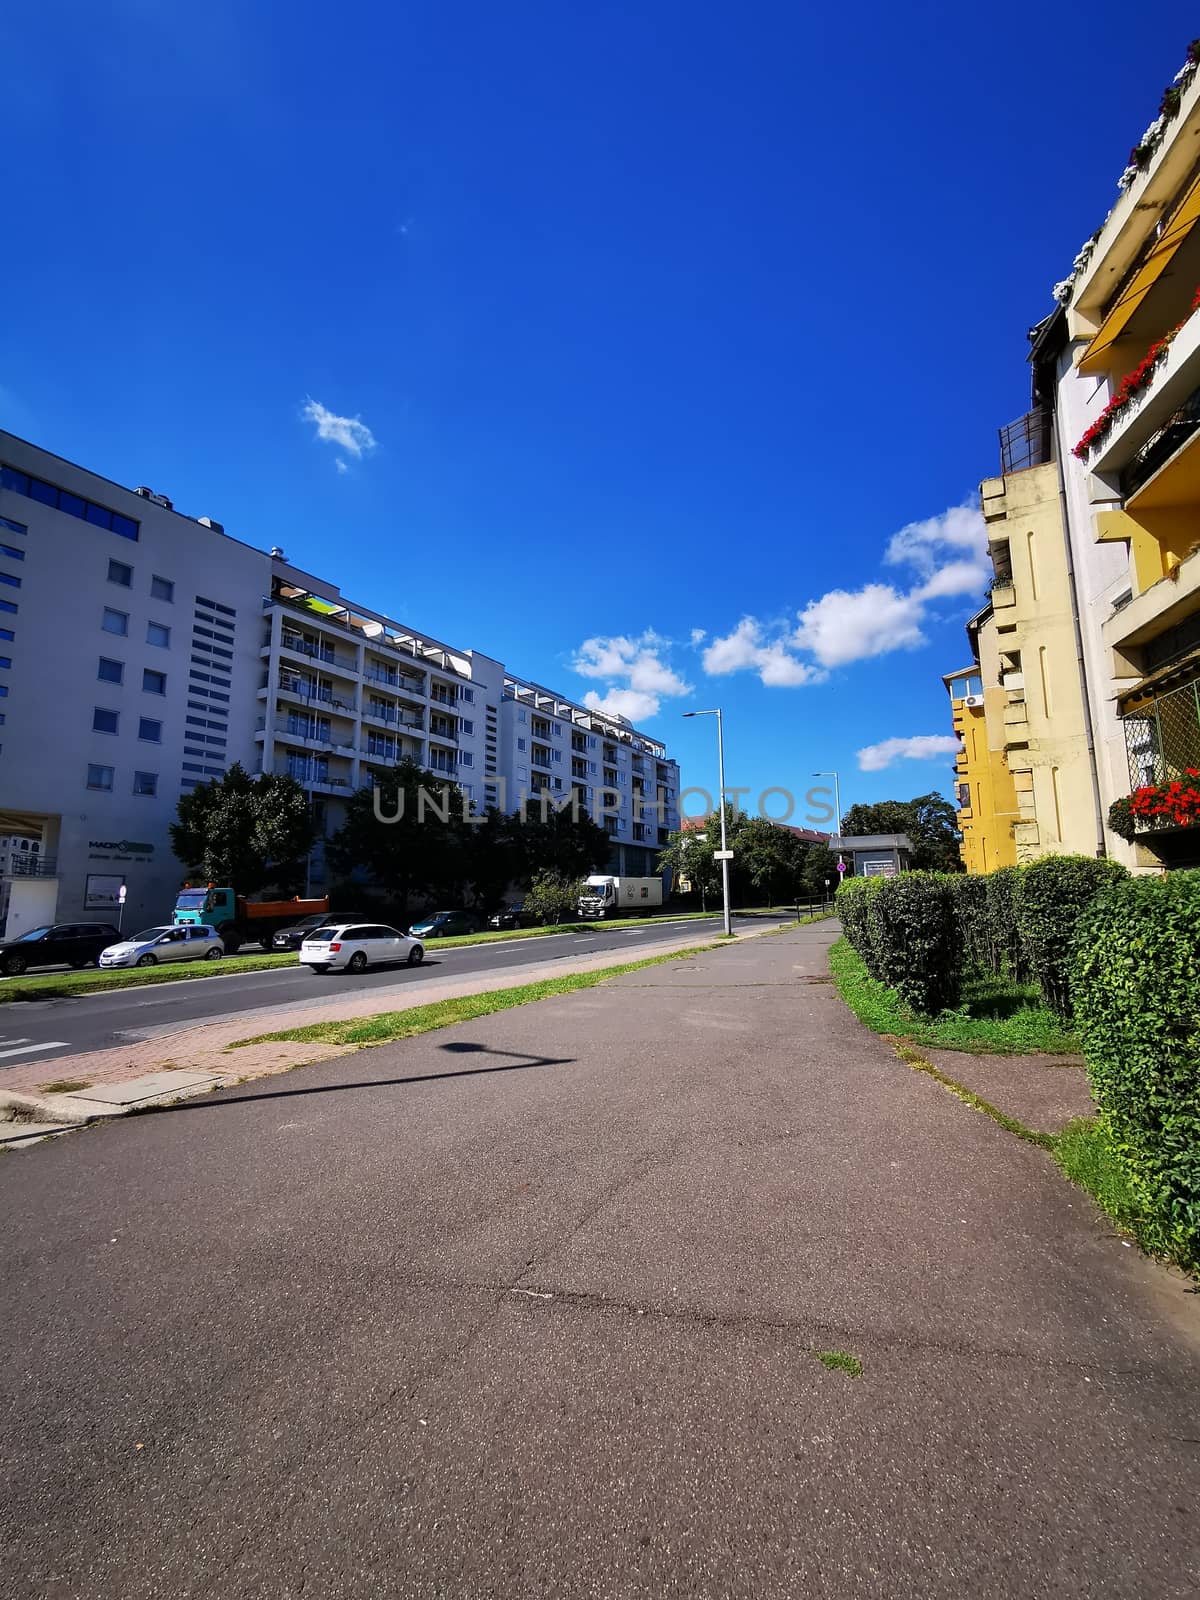 Suburban skyline with cars and panel buildings in Miskolc High quality photo